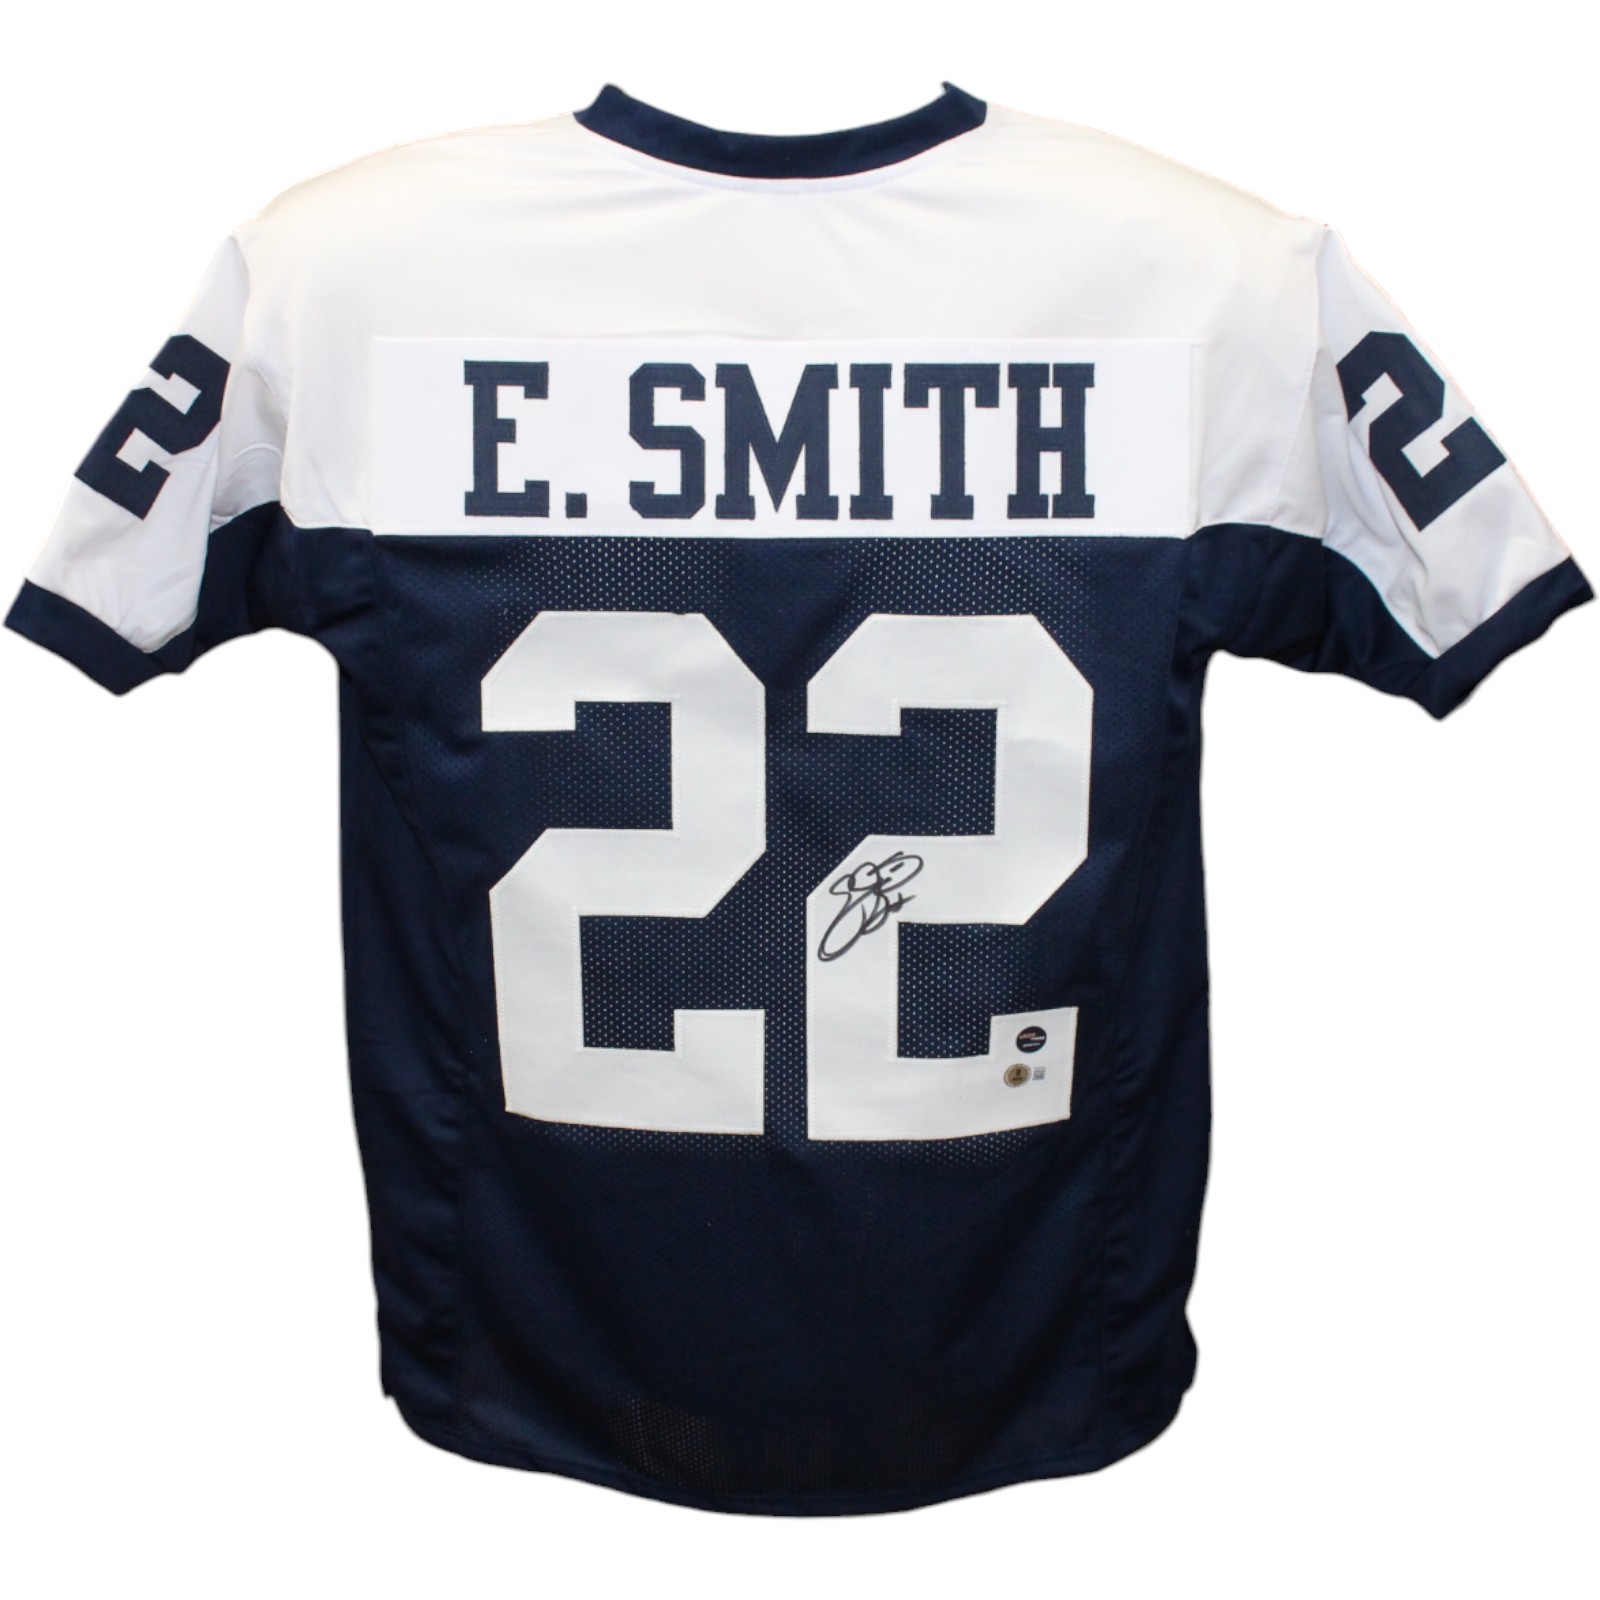 Emmitt Smith Autographed/Signed Pro Style Thanksgiving Jersey Beckett